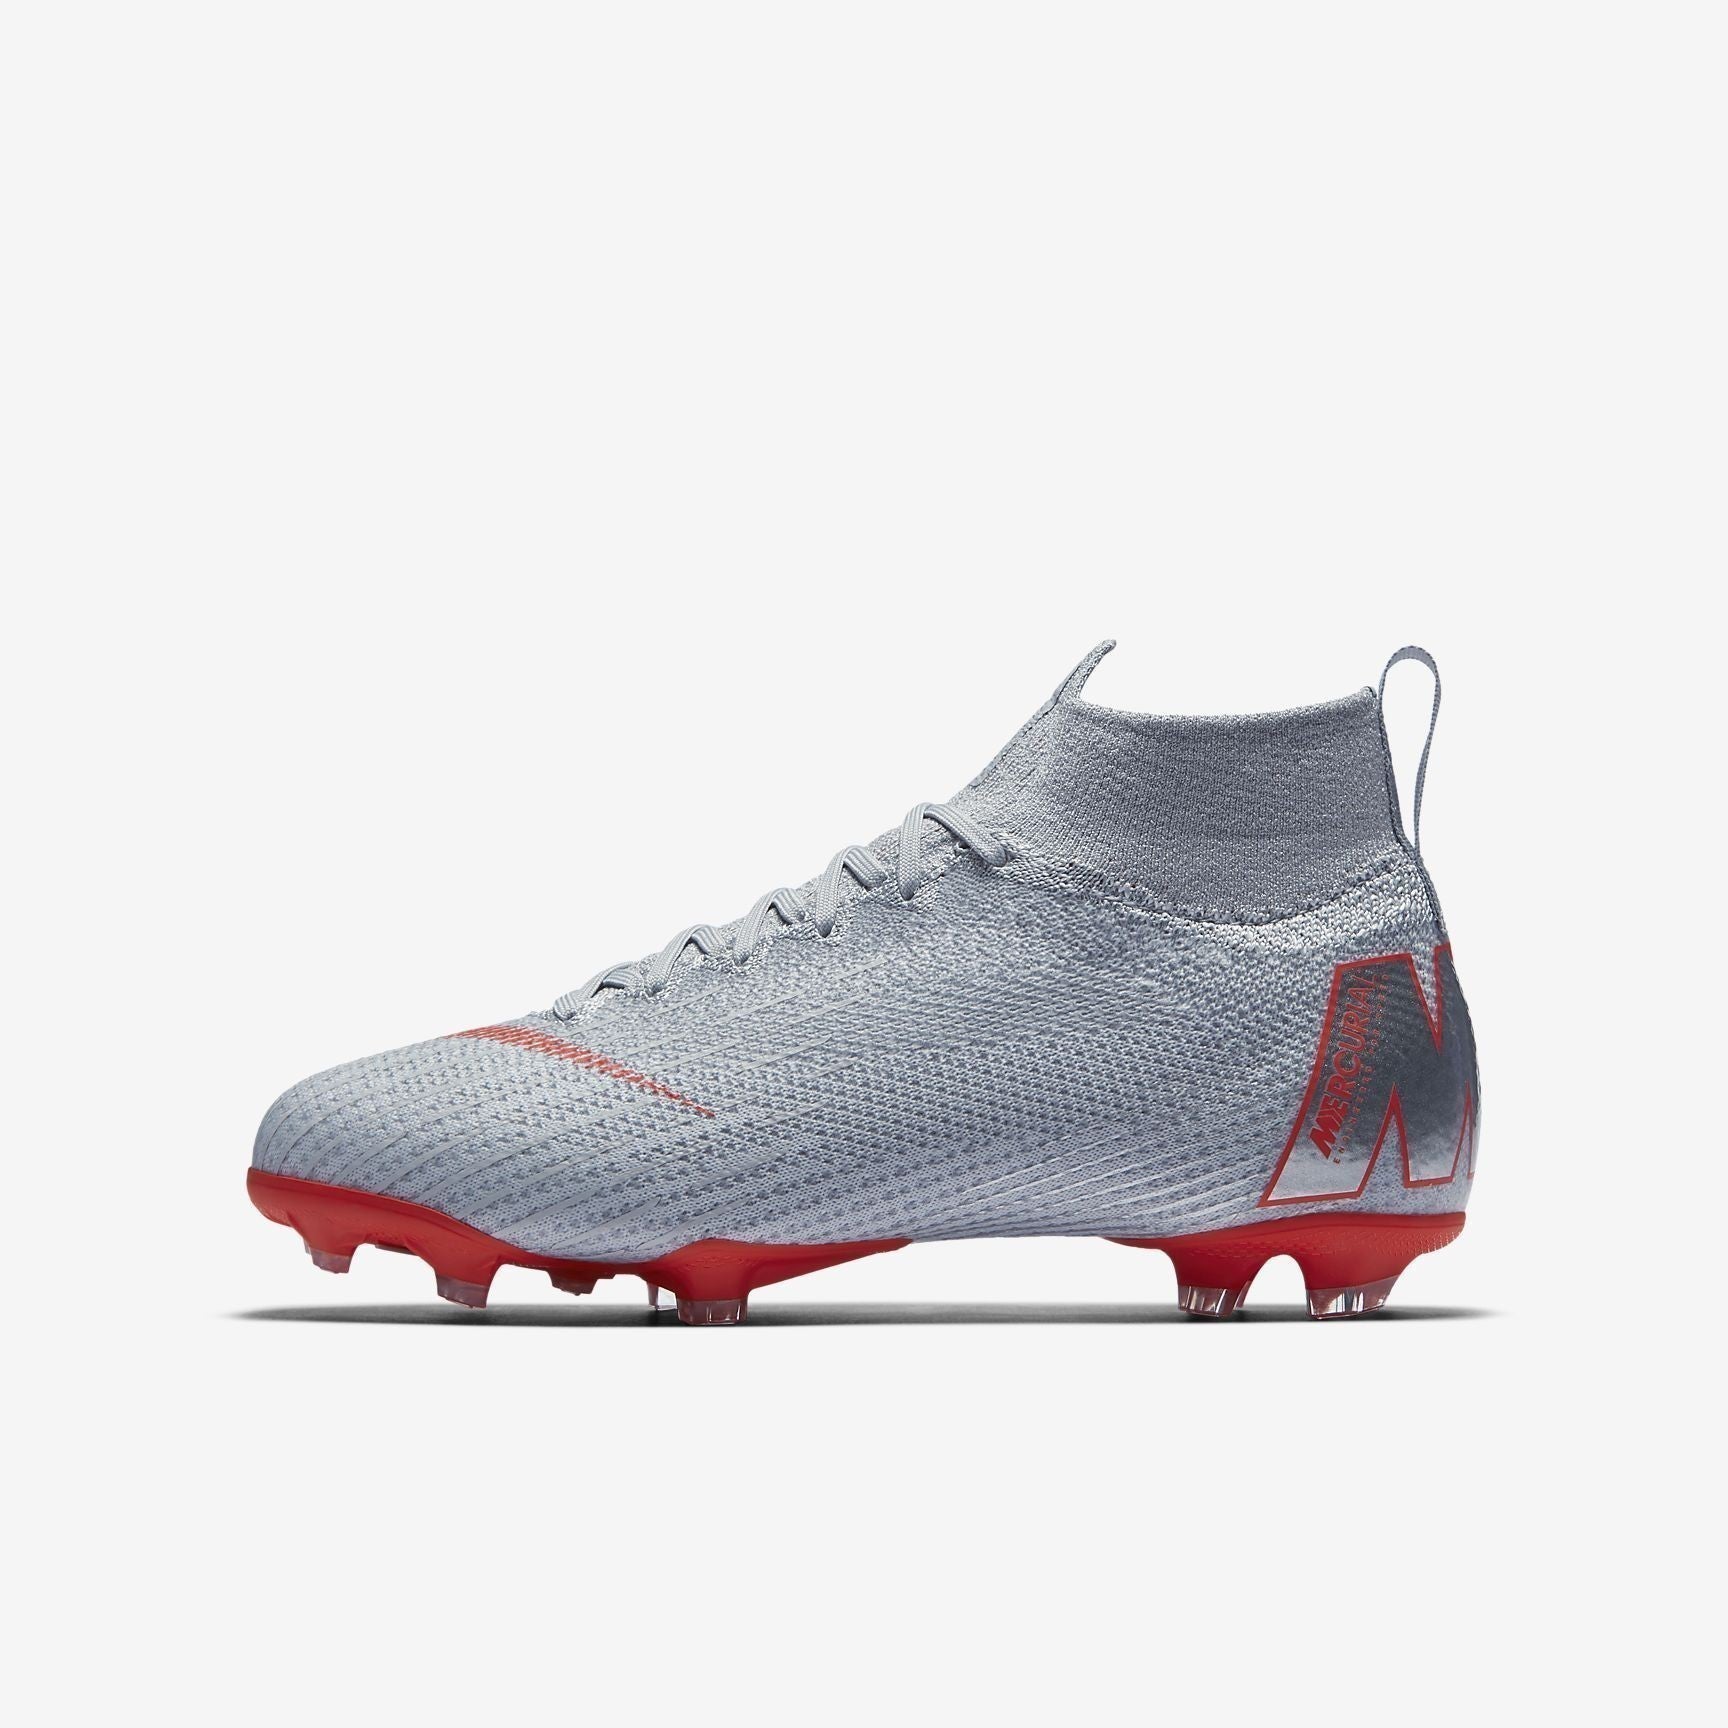 Superfly 360 Elite FG Soccer Cleats - Grey/Platinum/Silver